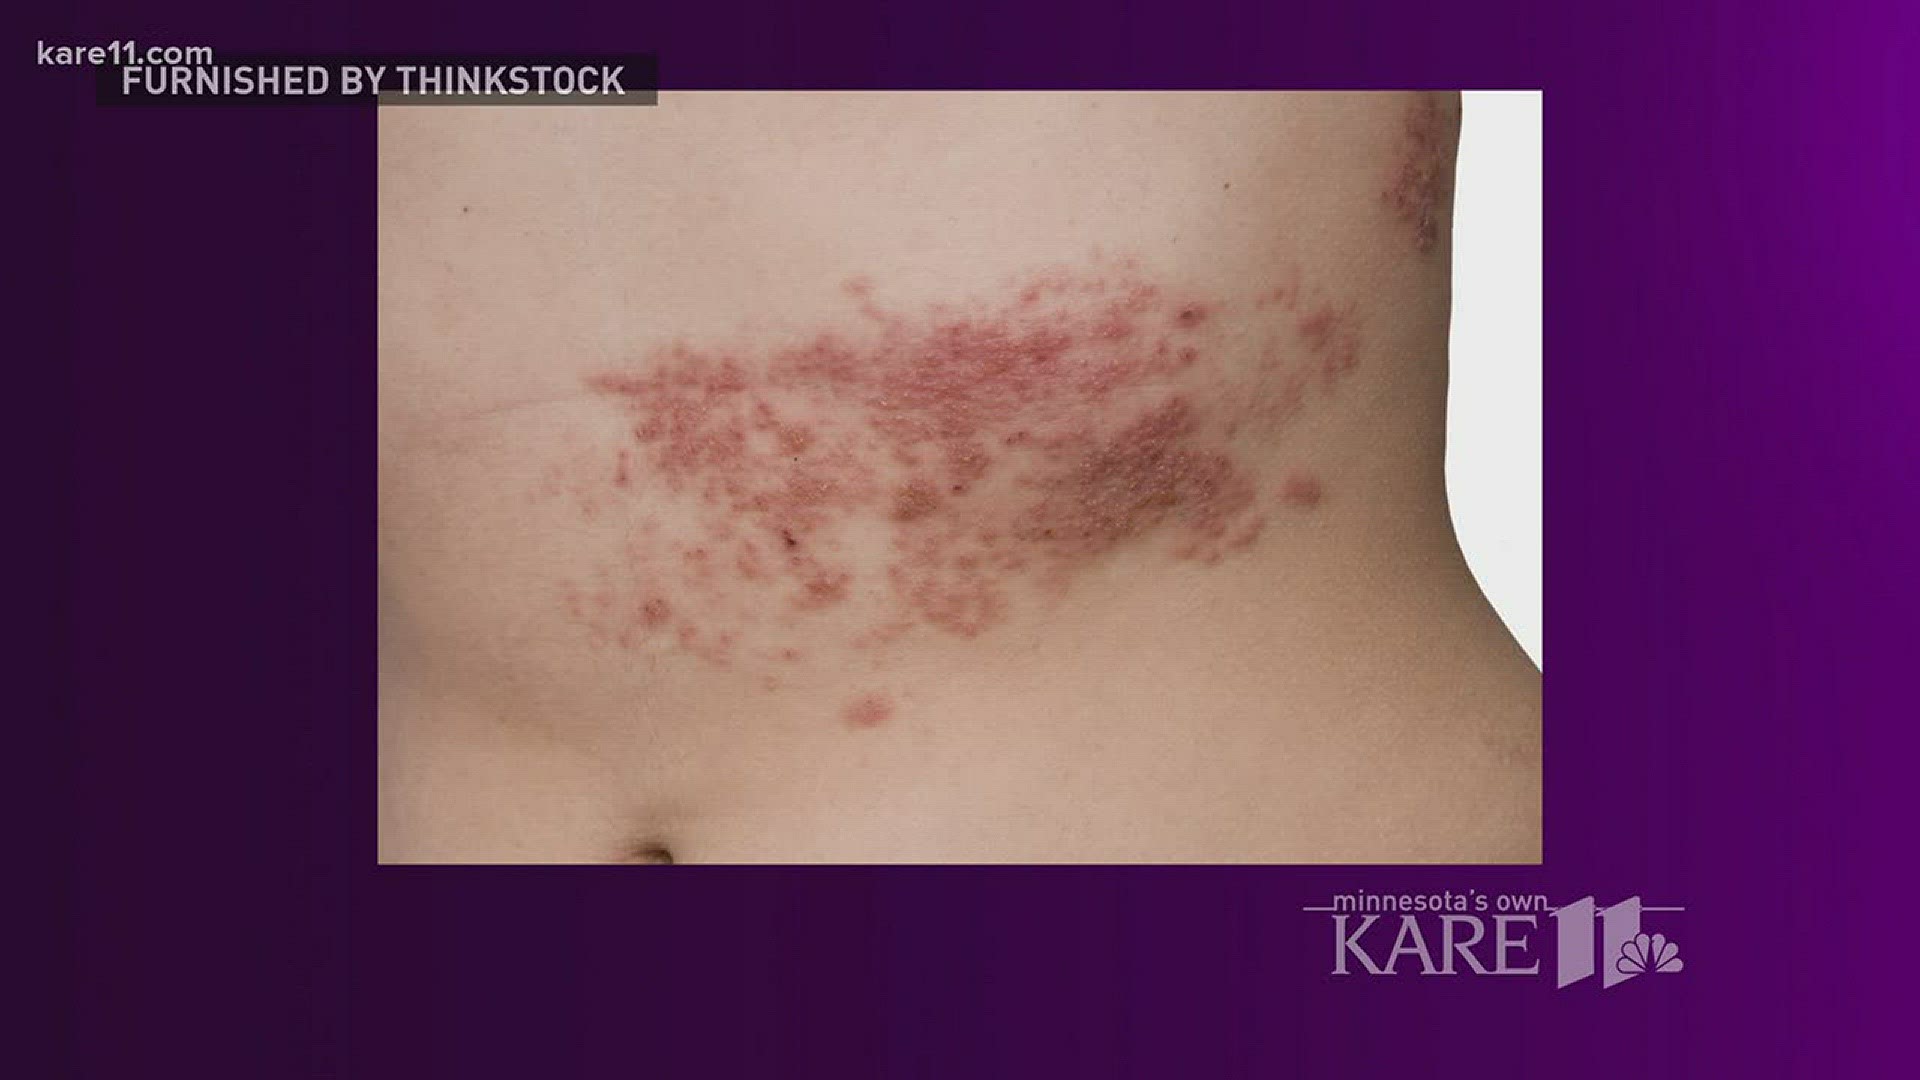 Shingles is caused by a reactivation of the virus that triggers chicken pox, a condition which is extremely painful.